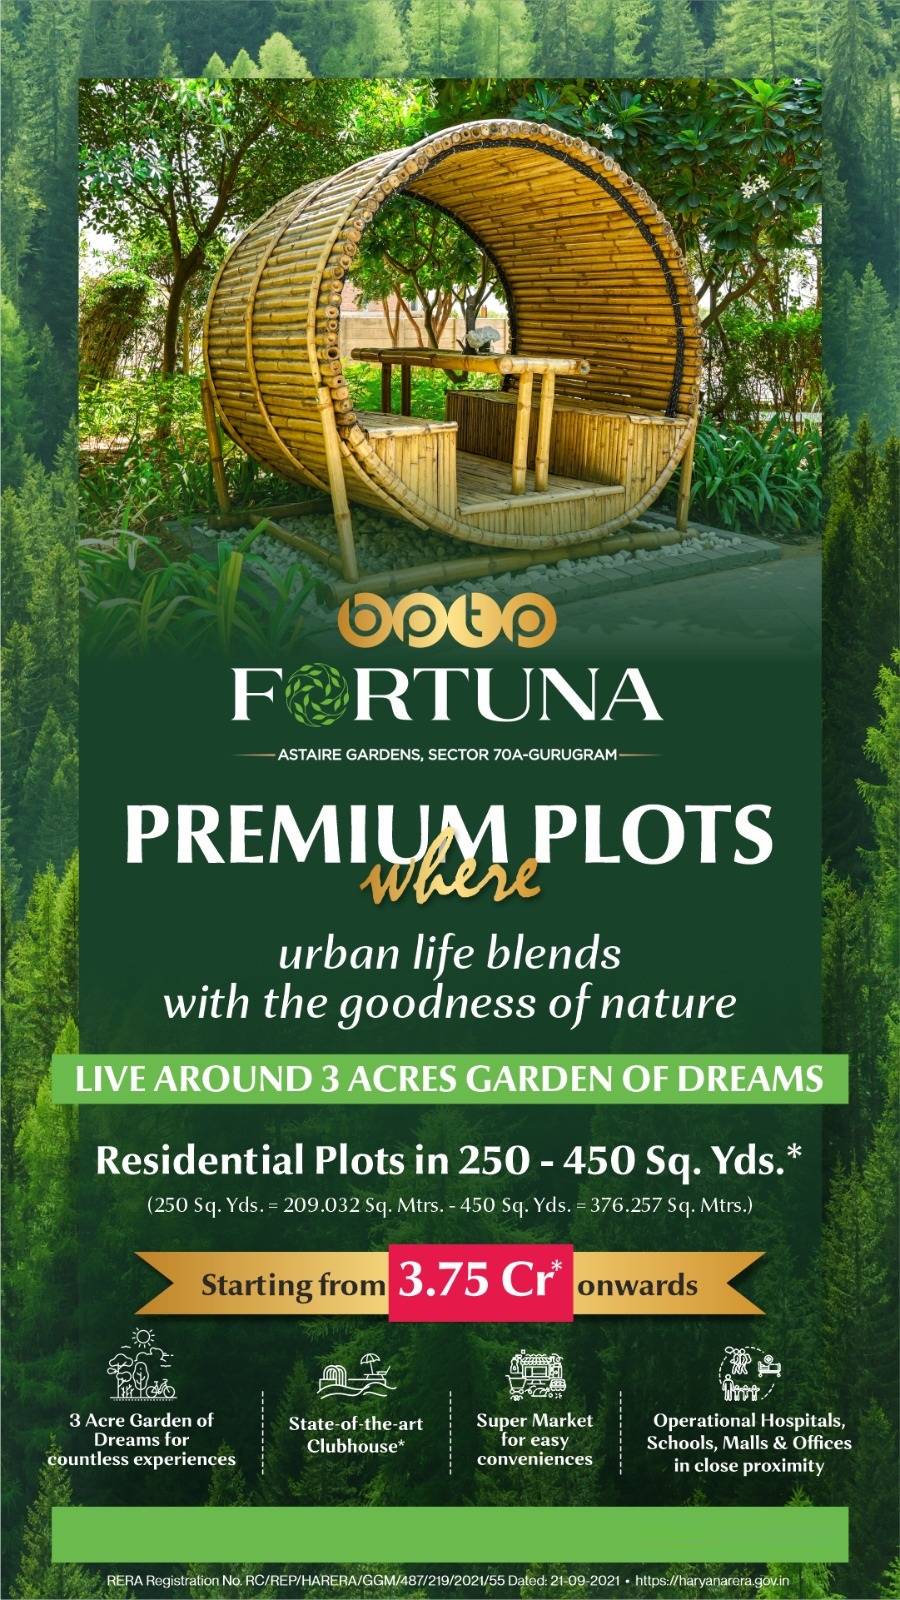 Residential plots price starts Rs 3.75 Cr at BPTP Fortuna in Sector 70A, Gurgaon